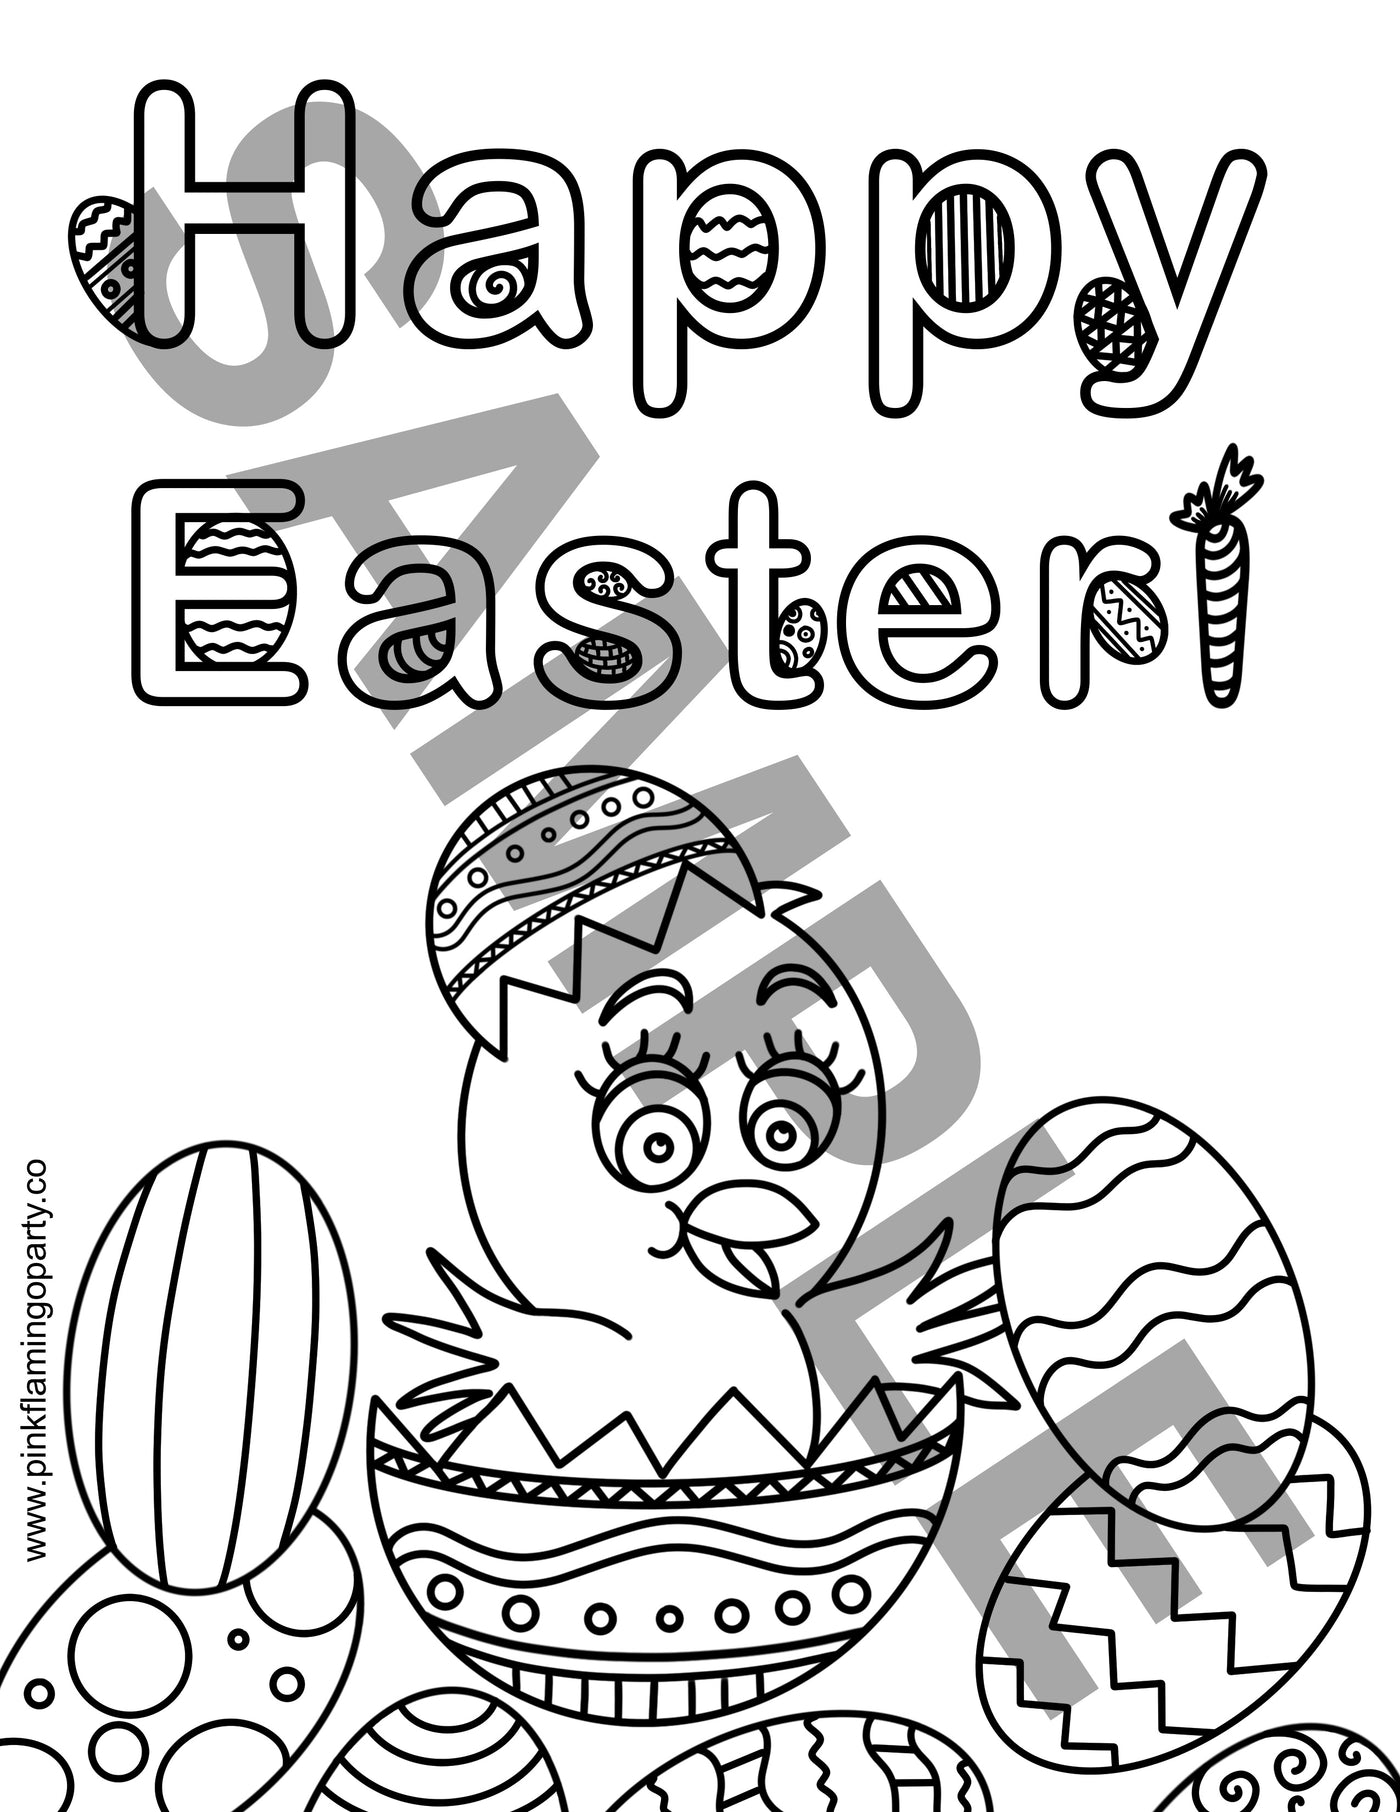 Happy Easter Chick FREE printable coloring sheet